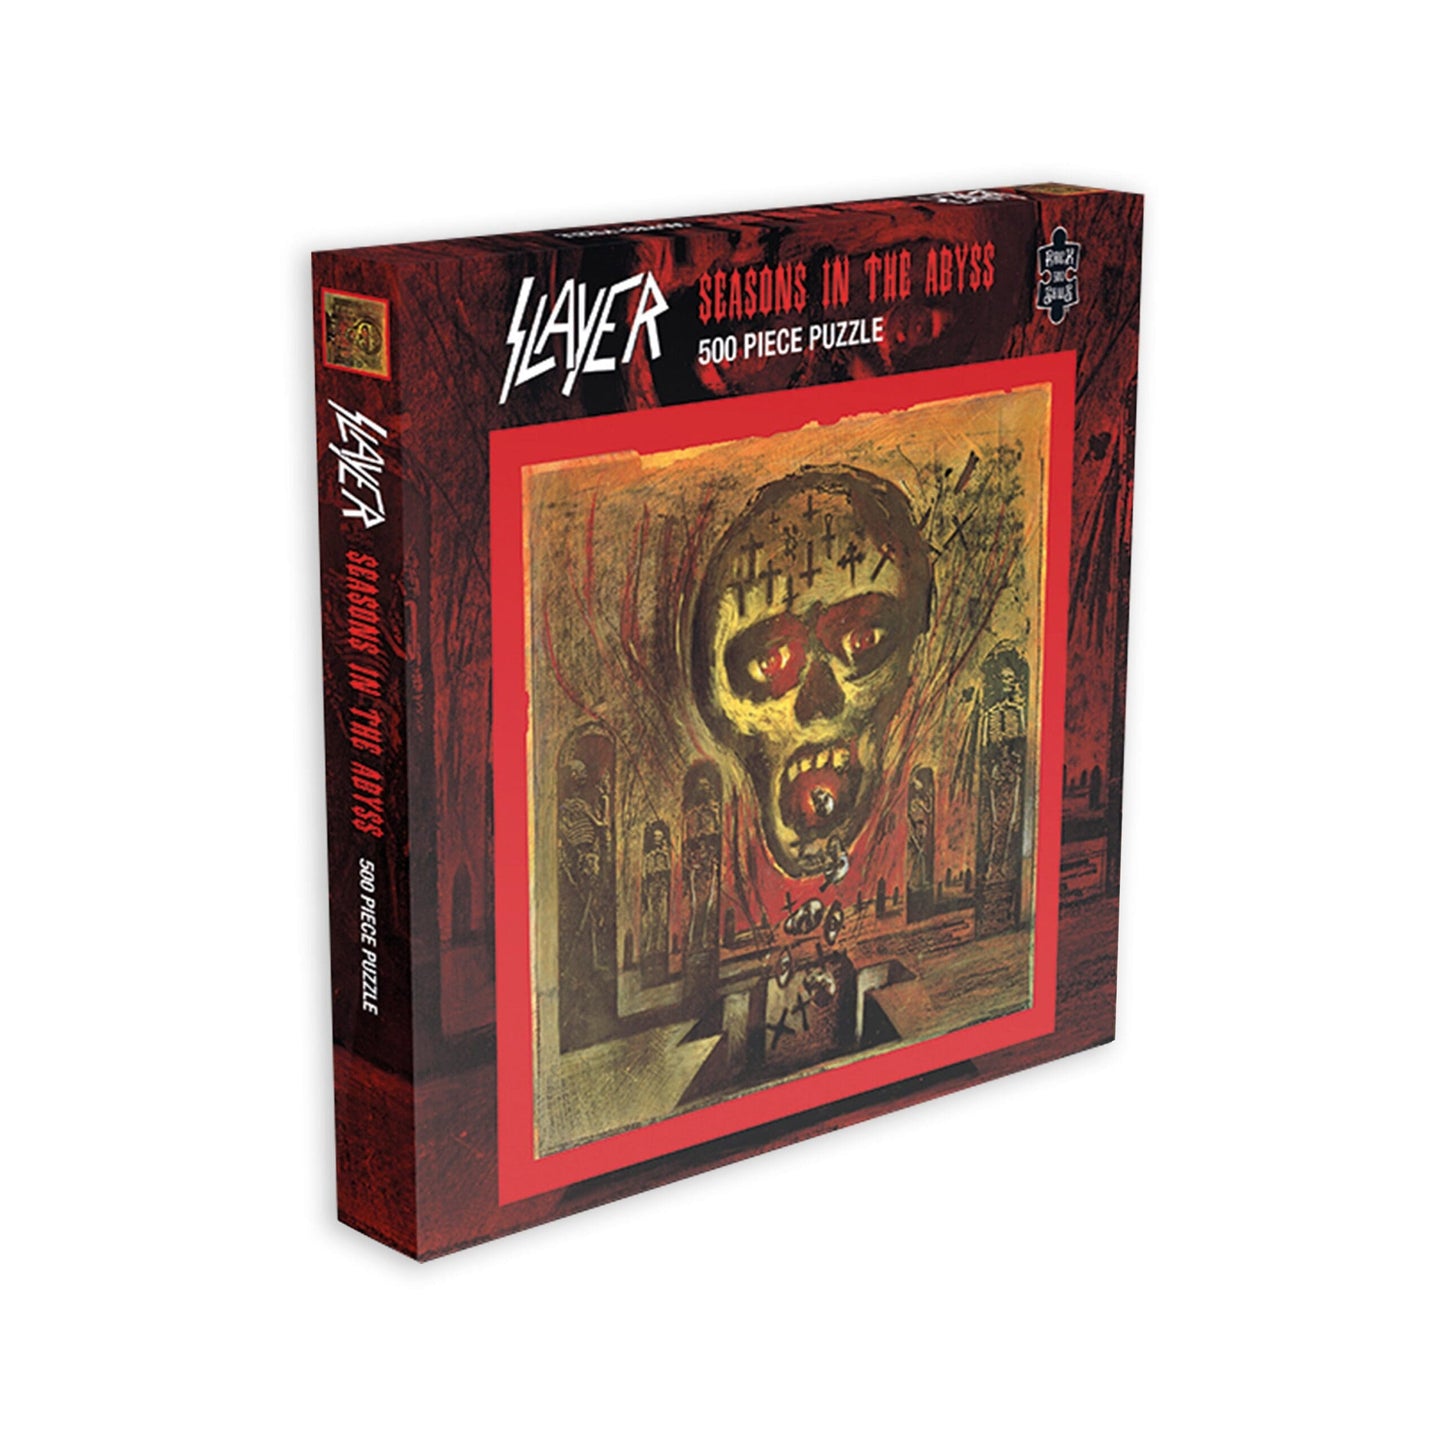 Slayer Seasons In The Abyss, 500 Piece Jigsaw Puzzle